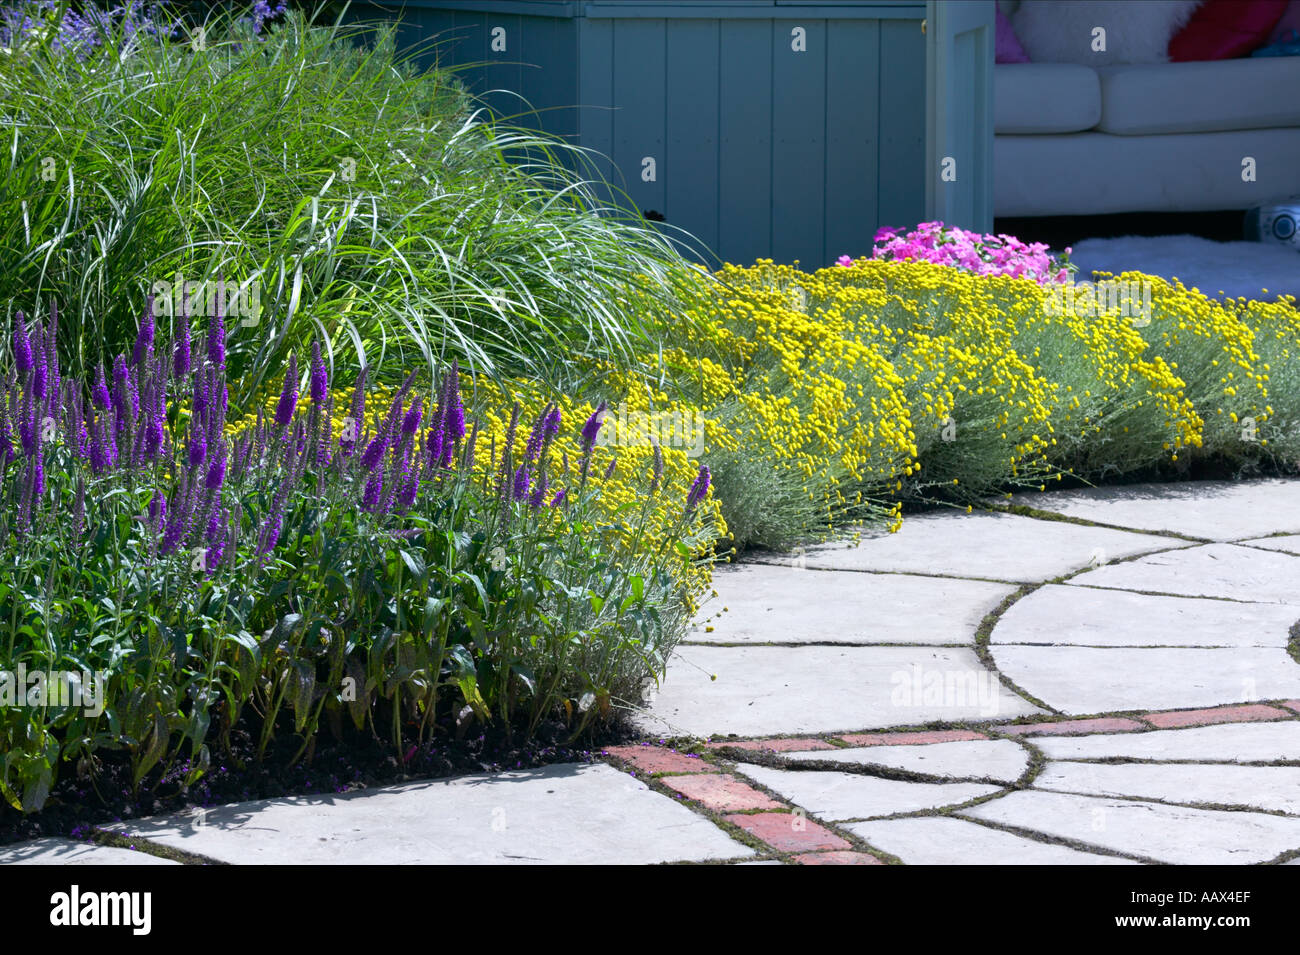 Curved path with flags and mixed planting Stock Photo